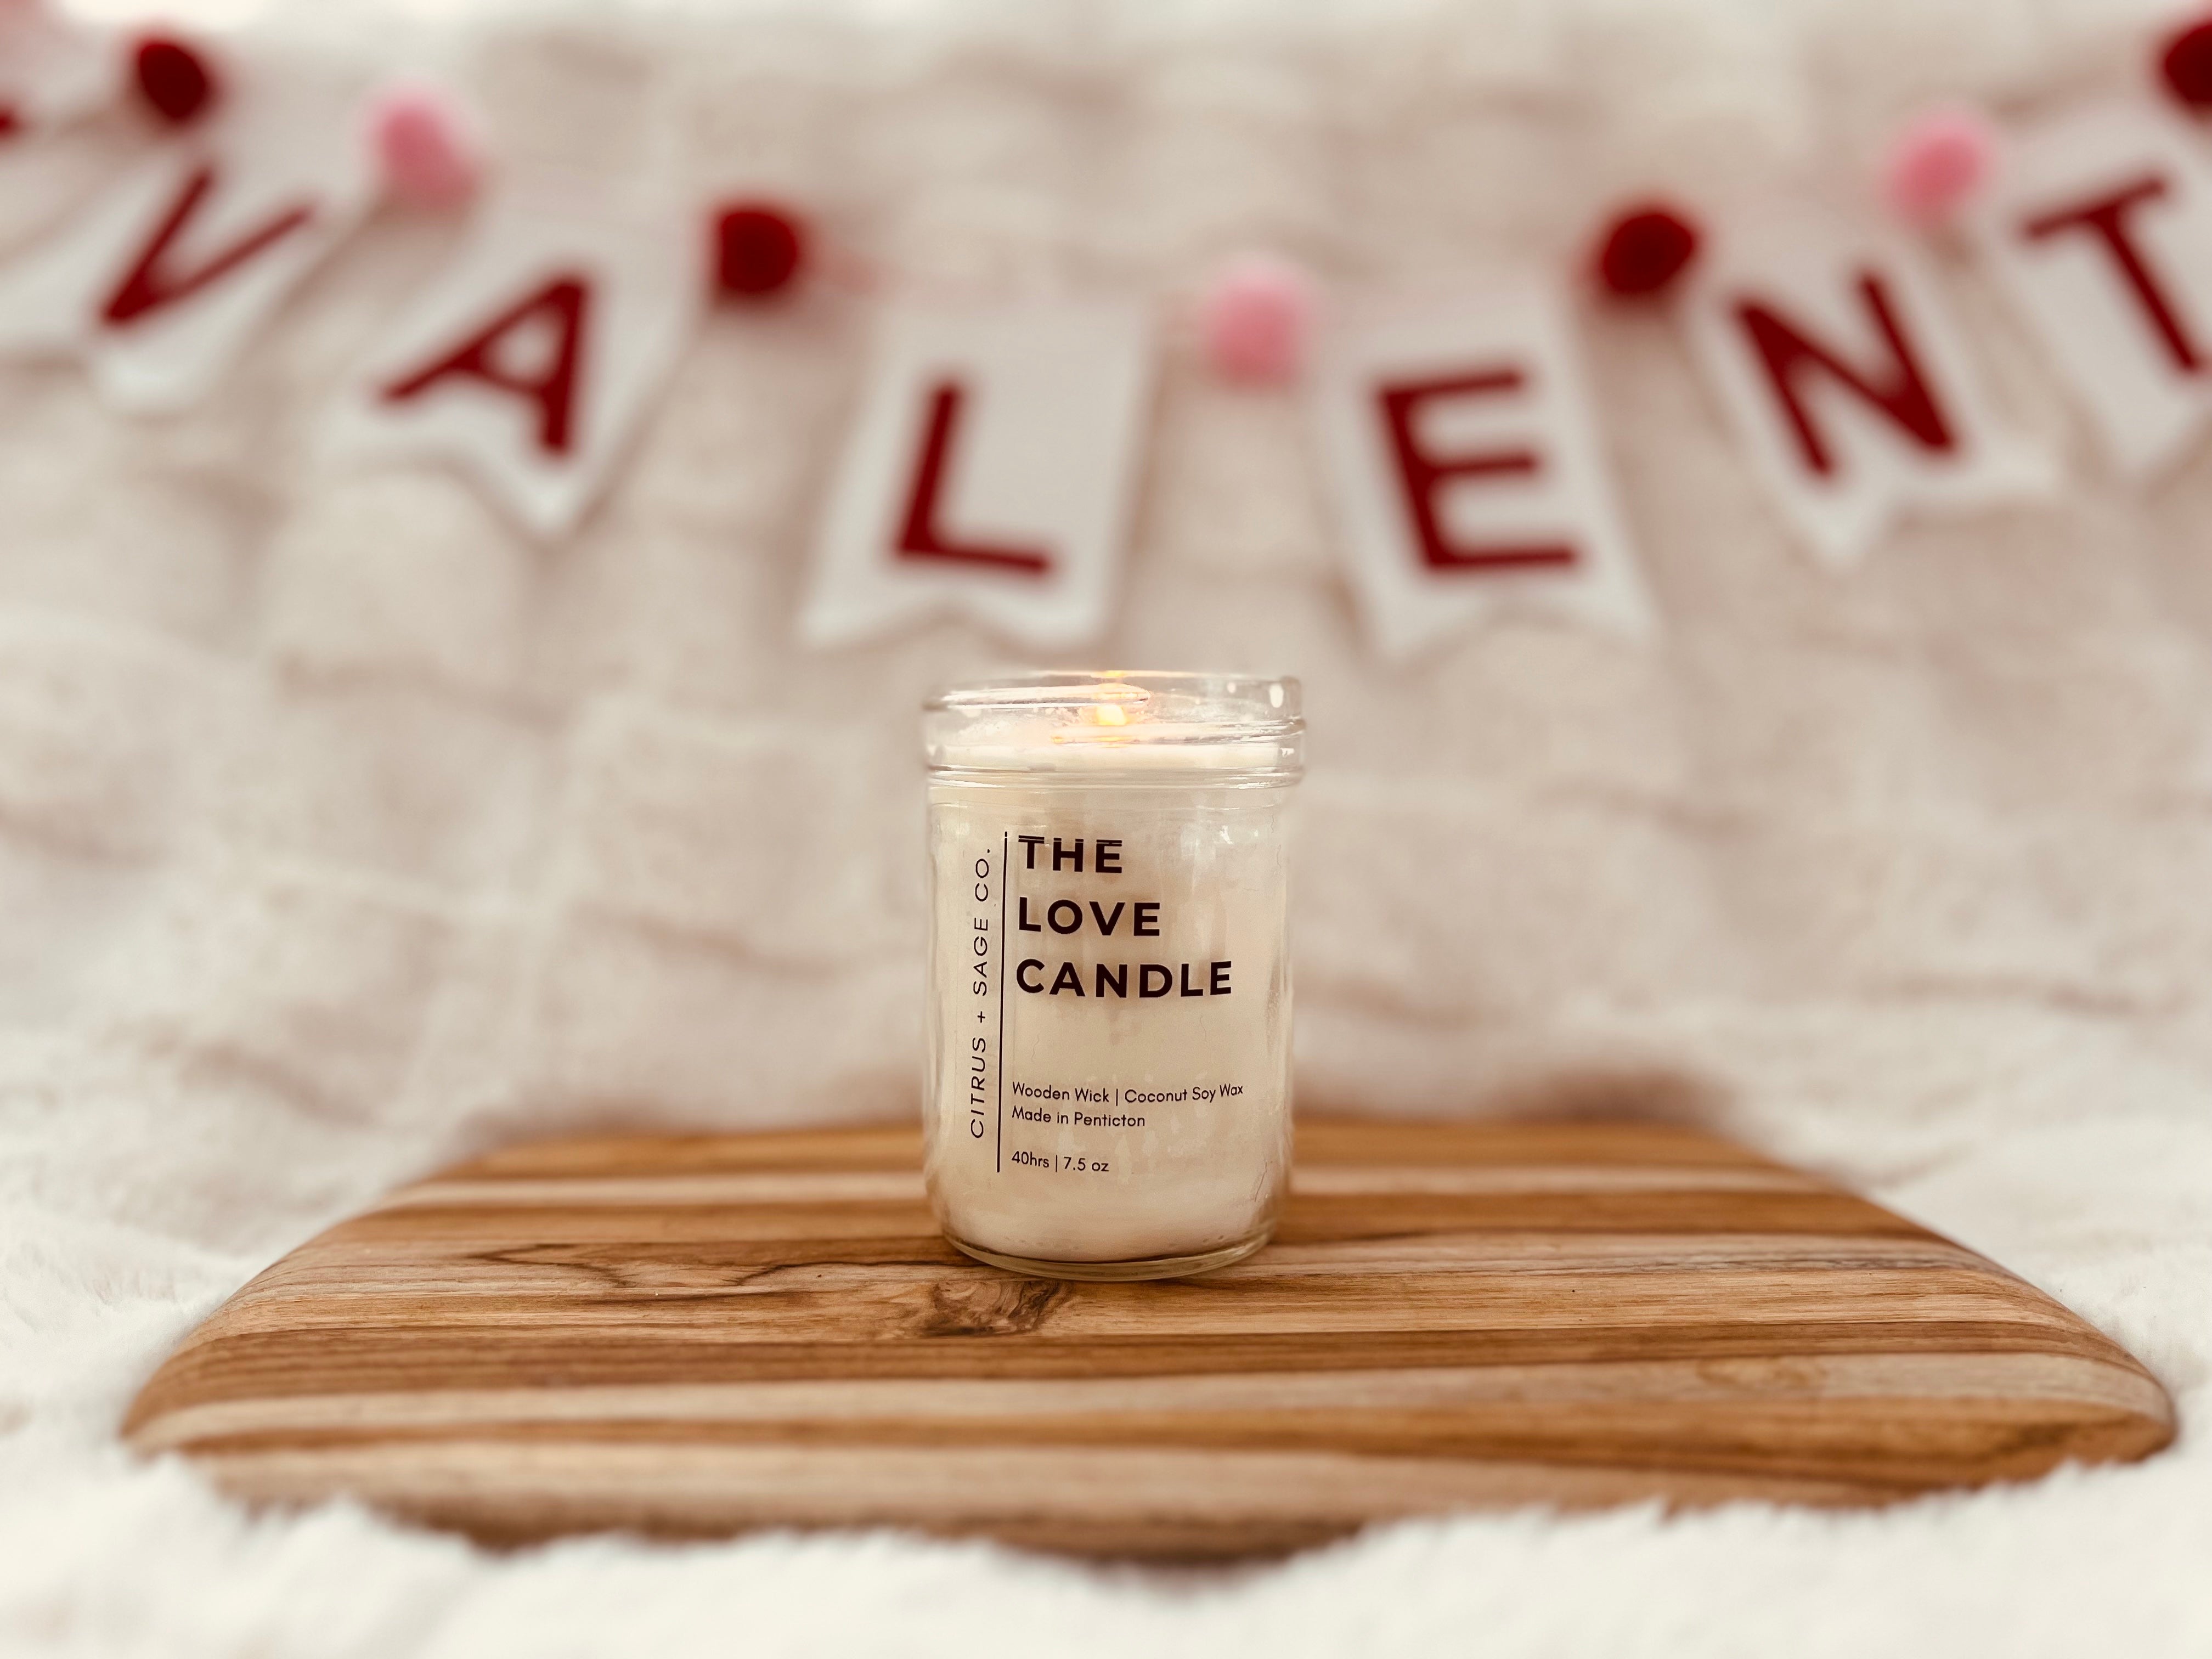 The Love Candle.